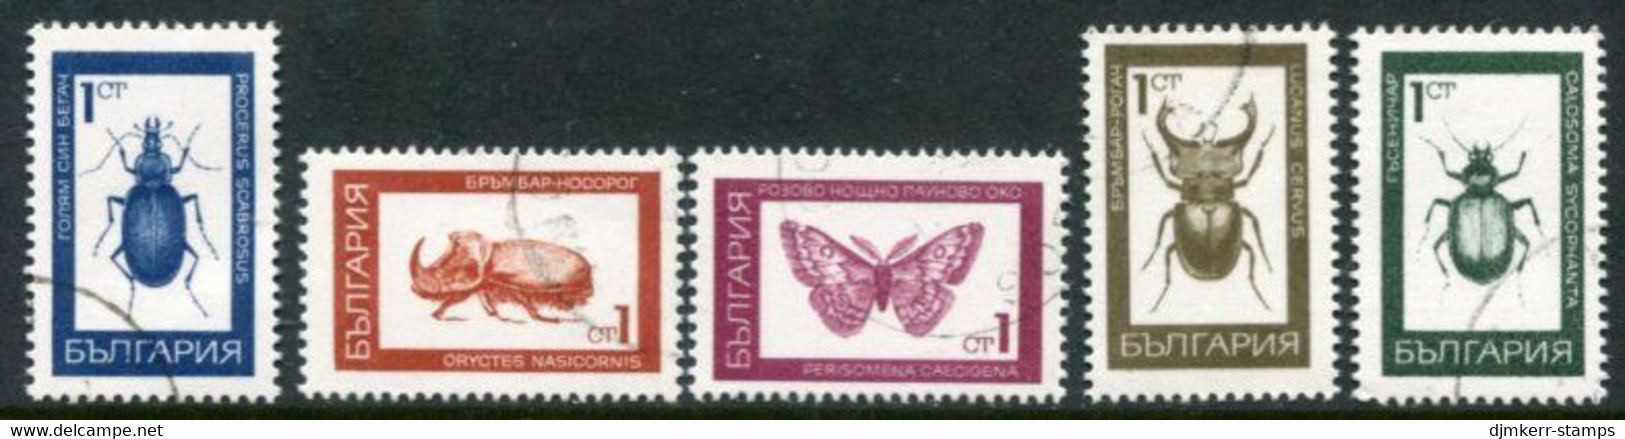 BULGARIA 1968 Insects Used.  Michel 1826-30 - Usati